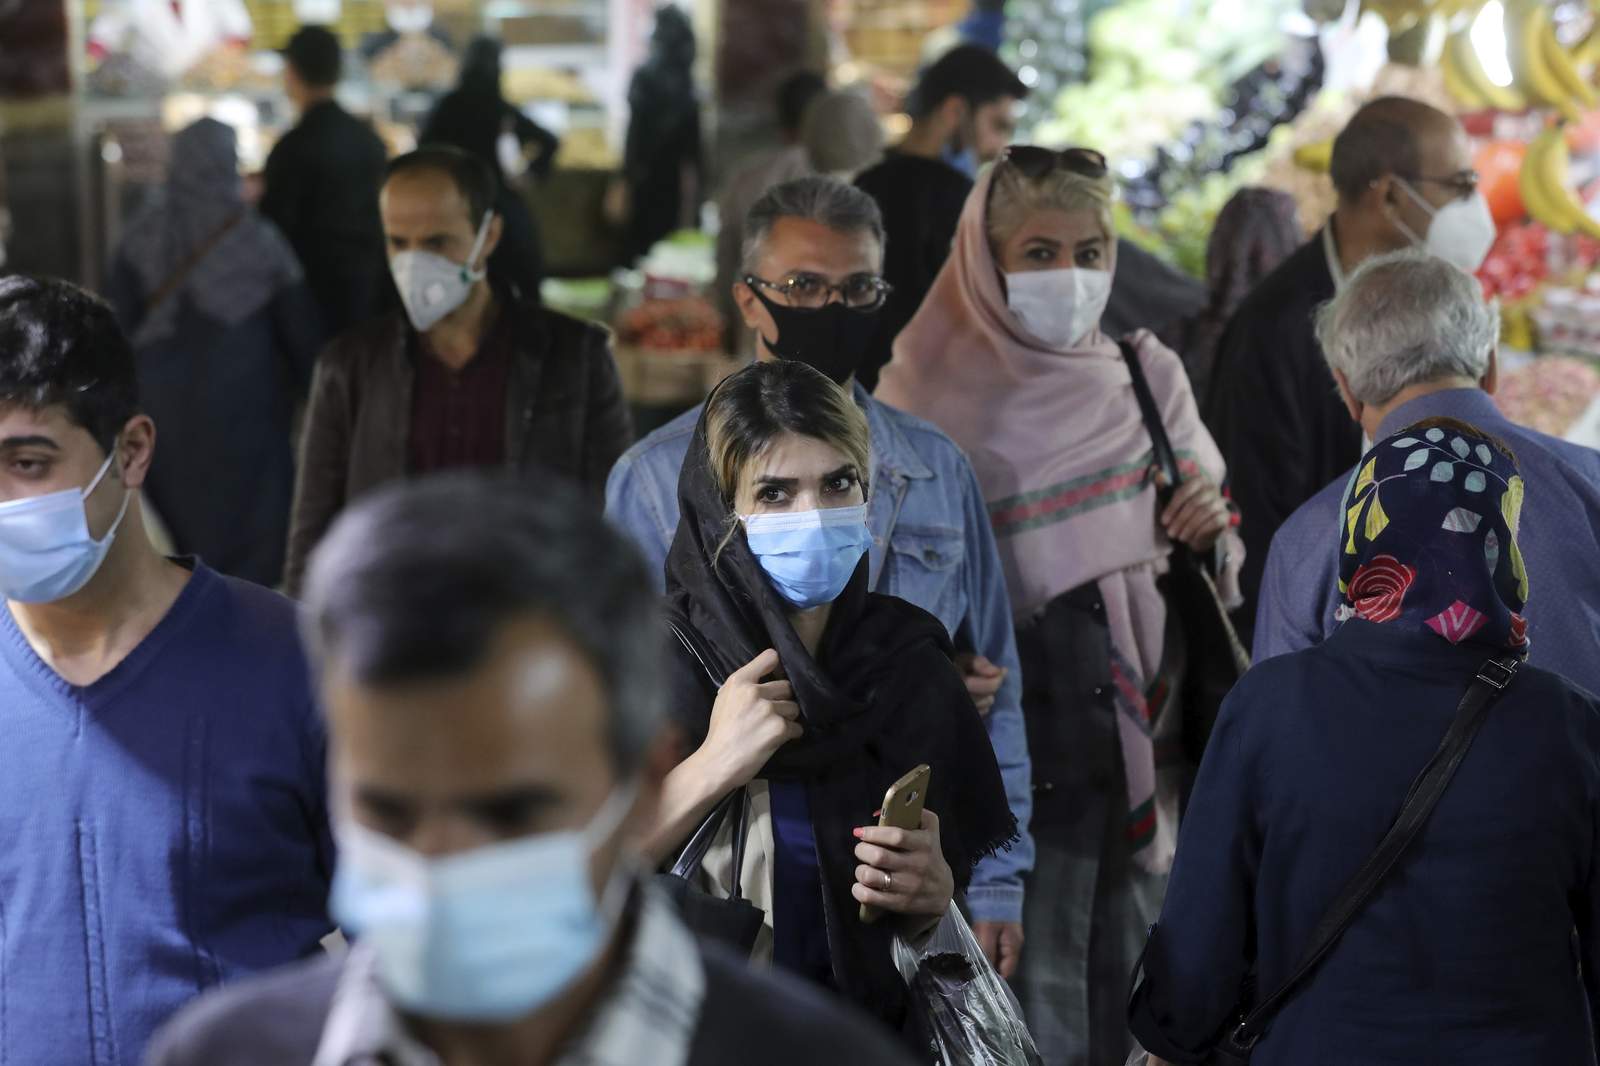 Wary of angering public, Iran has few ways to contain virus